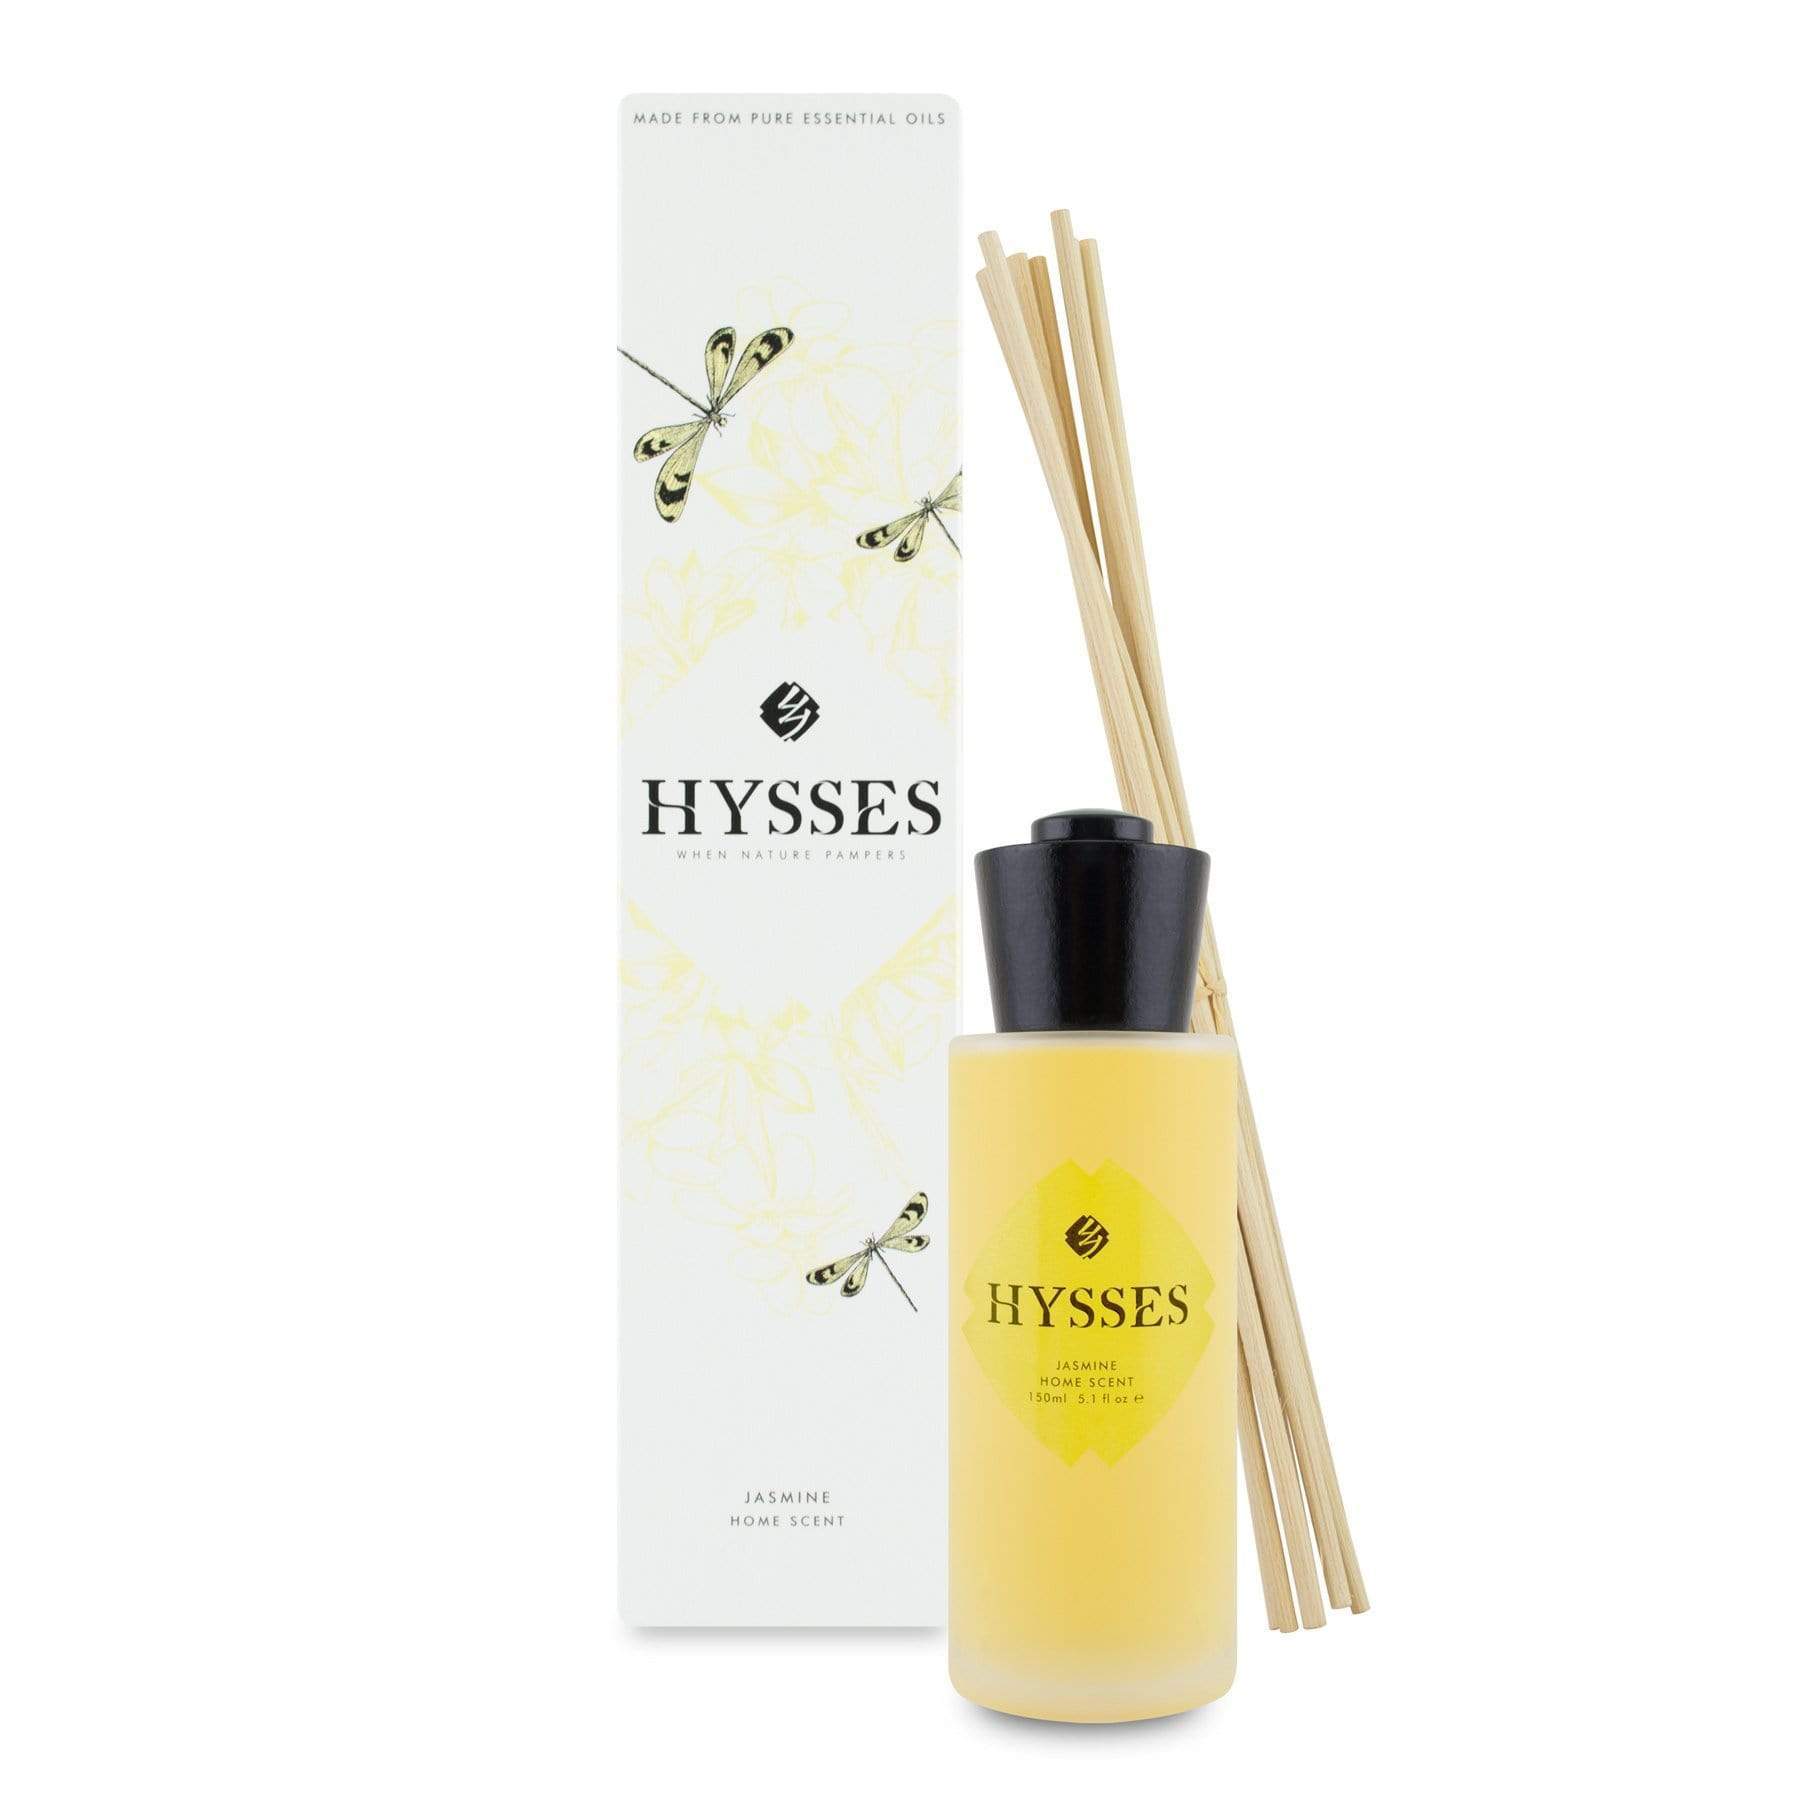 Hysses Home Scents 60ml Home Scent Reed Diffuser Jasmine